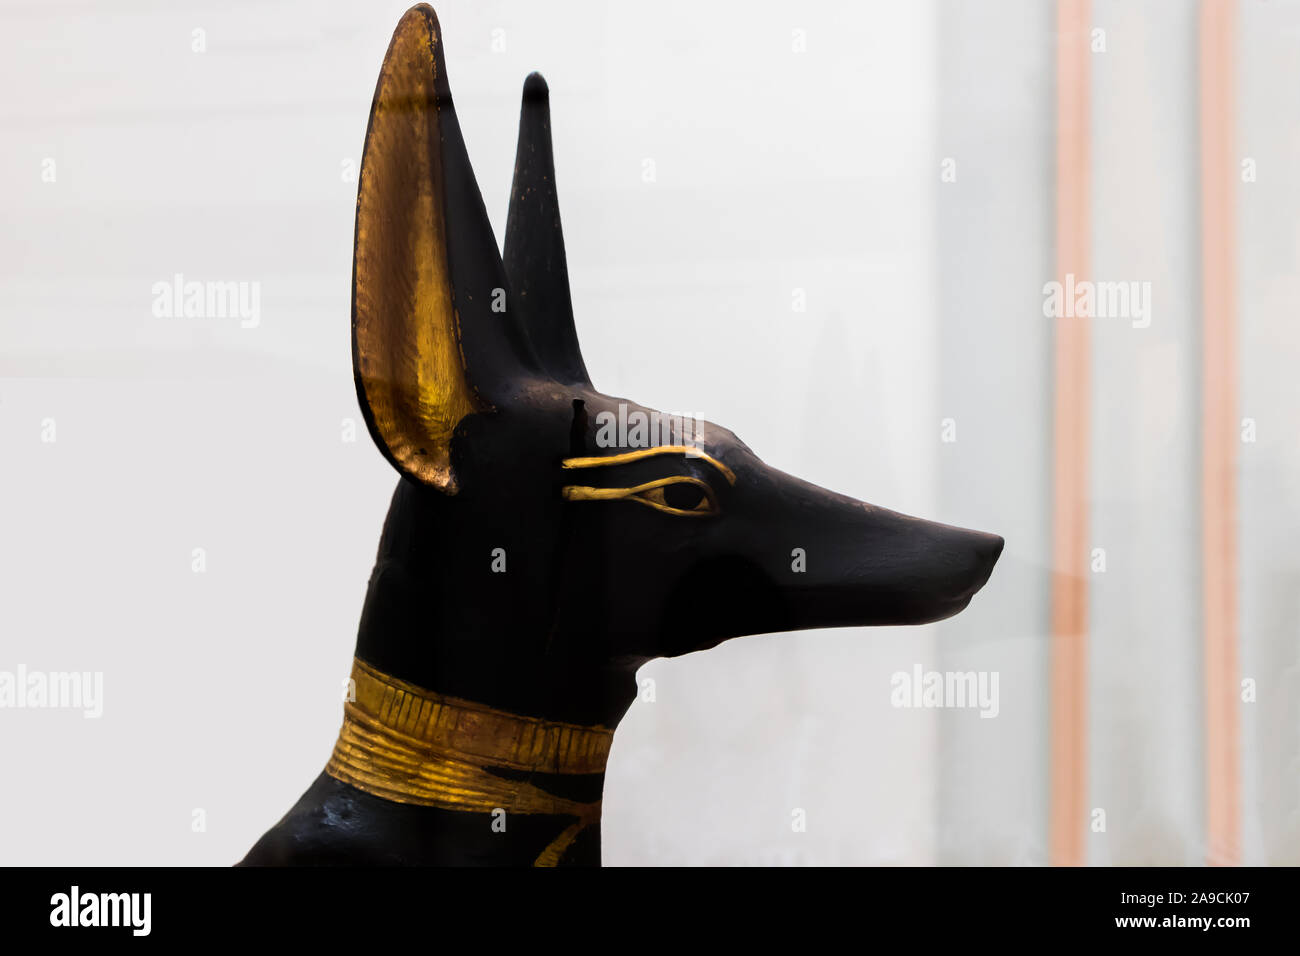 Cairo, Egypt - April 19, 2019: The Egyptian statue of god Anubis from Tutankhamun tomb in the Egyptian Museum, Cairo Stock Photo